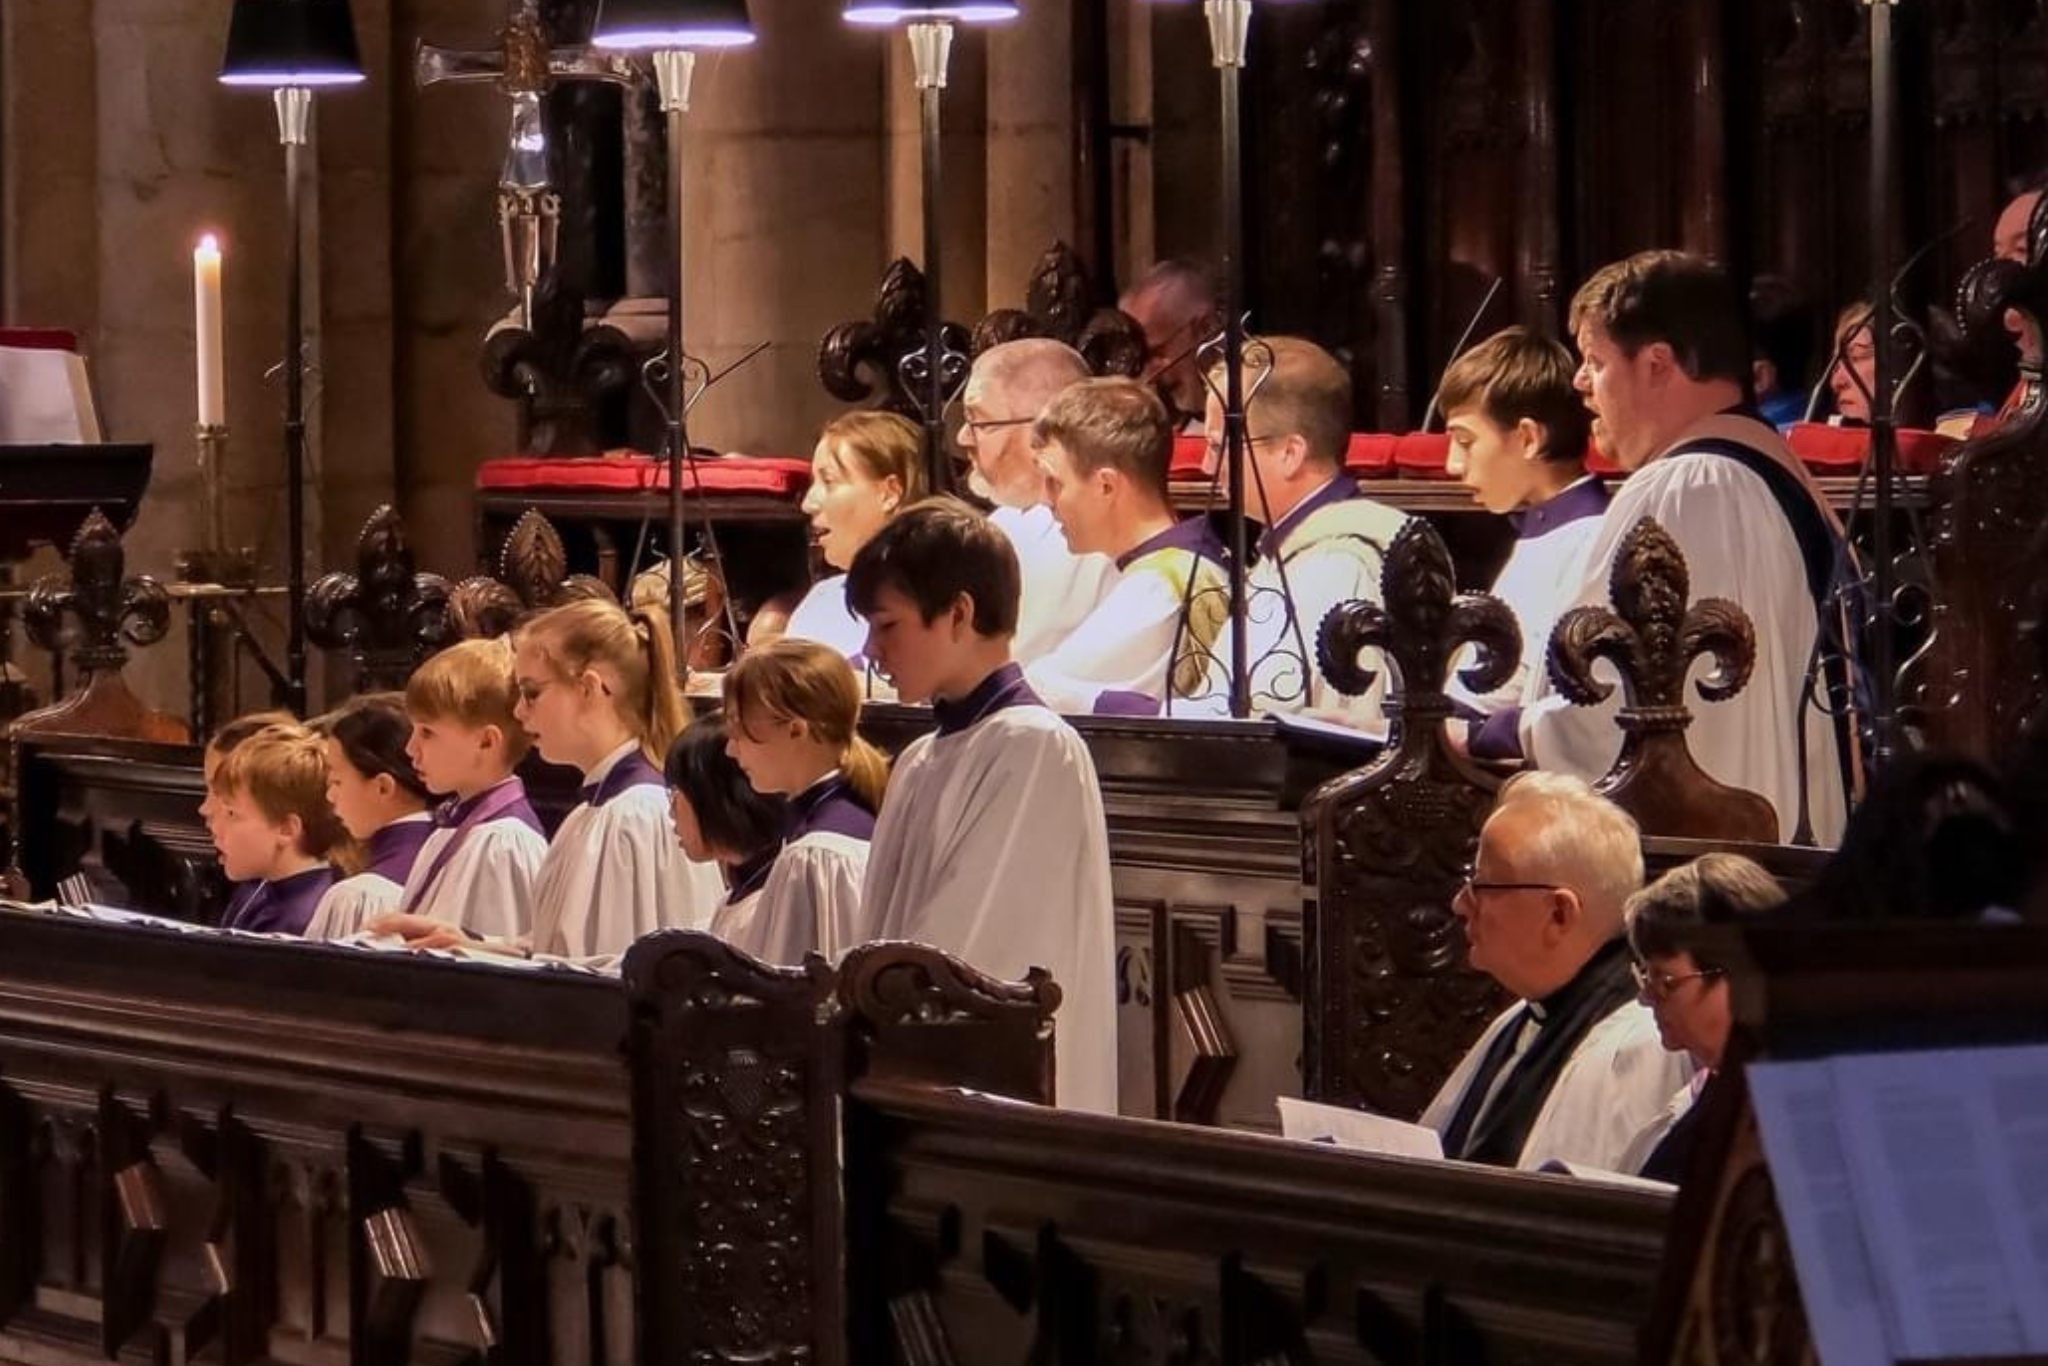 The choristers of Durham Cathedral Choir, dressed in white and singing.